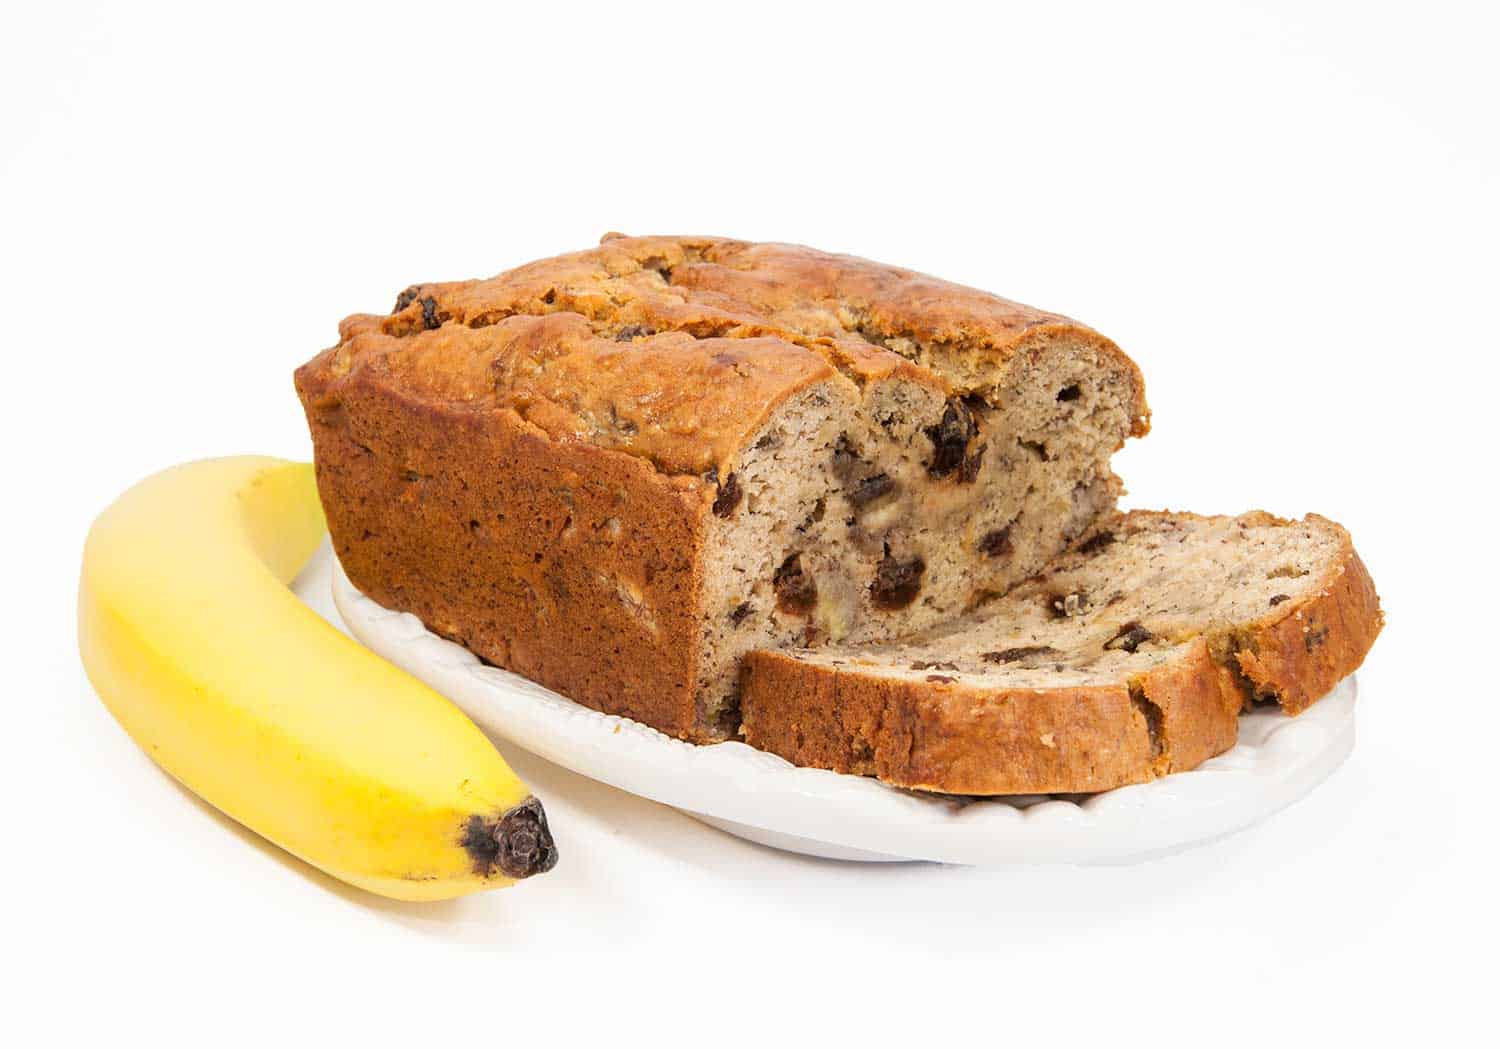 Homemade banana bread with raisins on a white dish with a banana against a white background